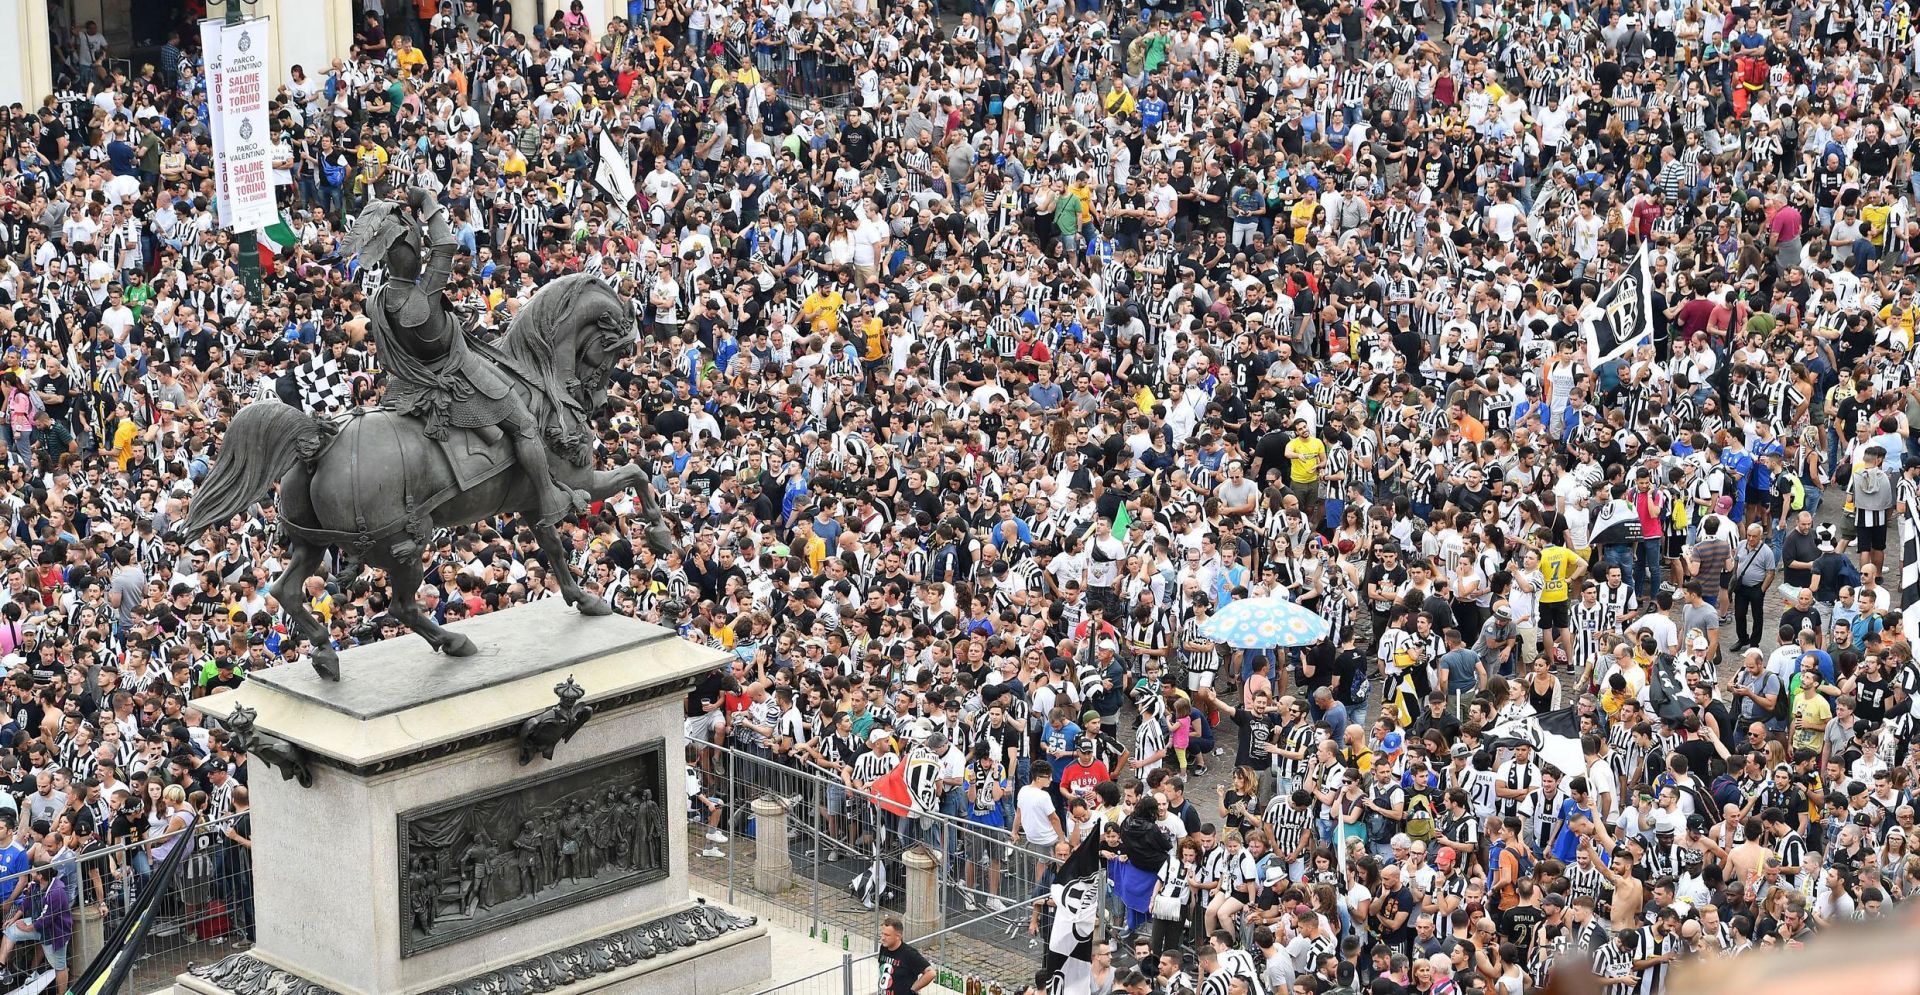 epa06008431 Juventus' supporters gather in San Carlos' Square in Turin, Italy, 03 June 2017, waiting for the start of the public viewing of the UEFA Champions League final betwenn Juventus FC and Real Madrid CF is being played in Cardiff.  EPA/ALESSANDRO DI MARCO